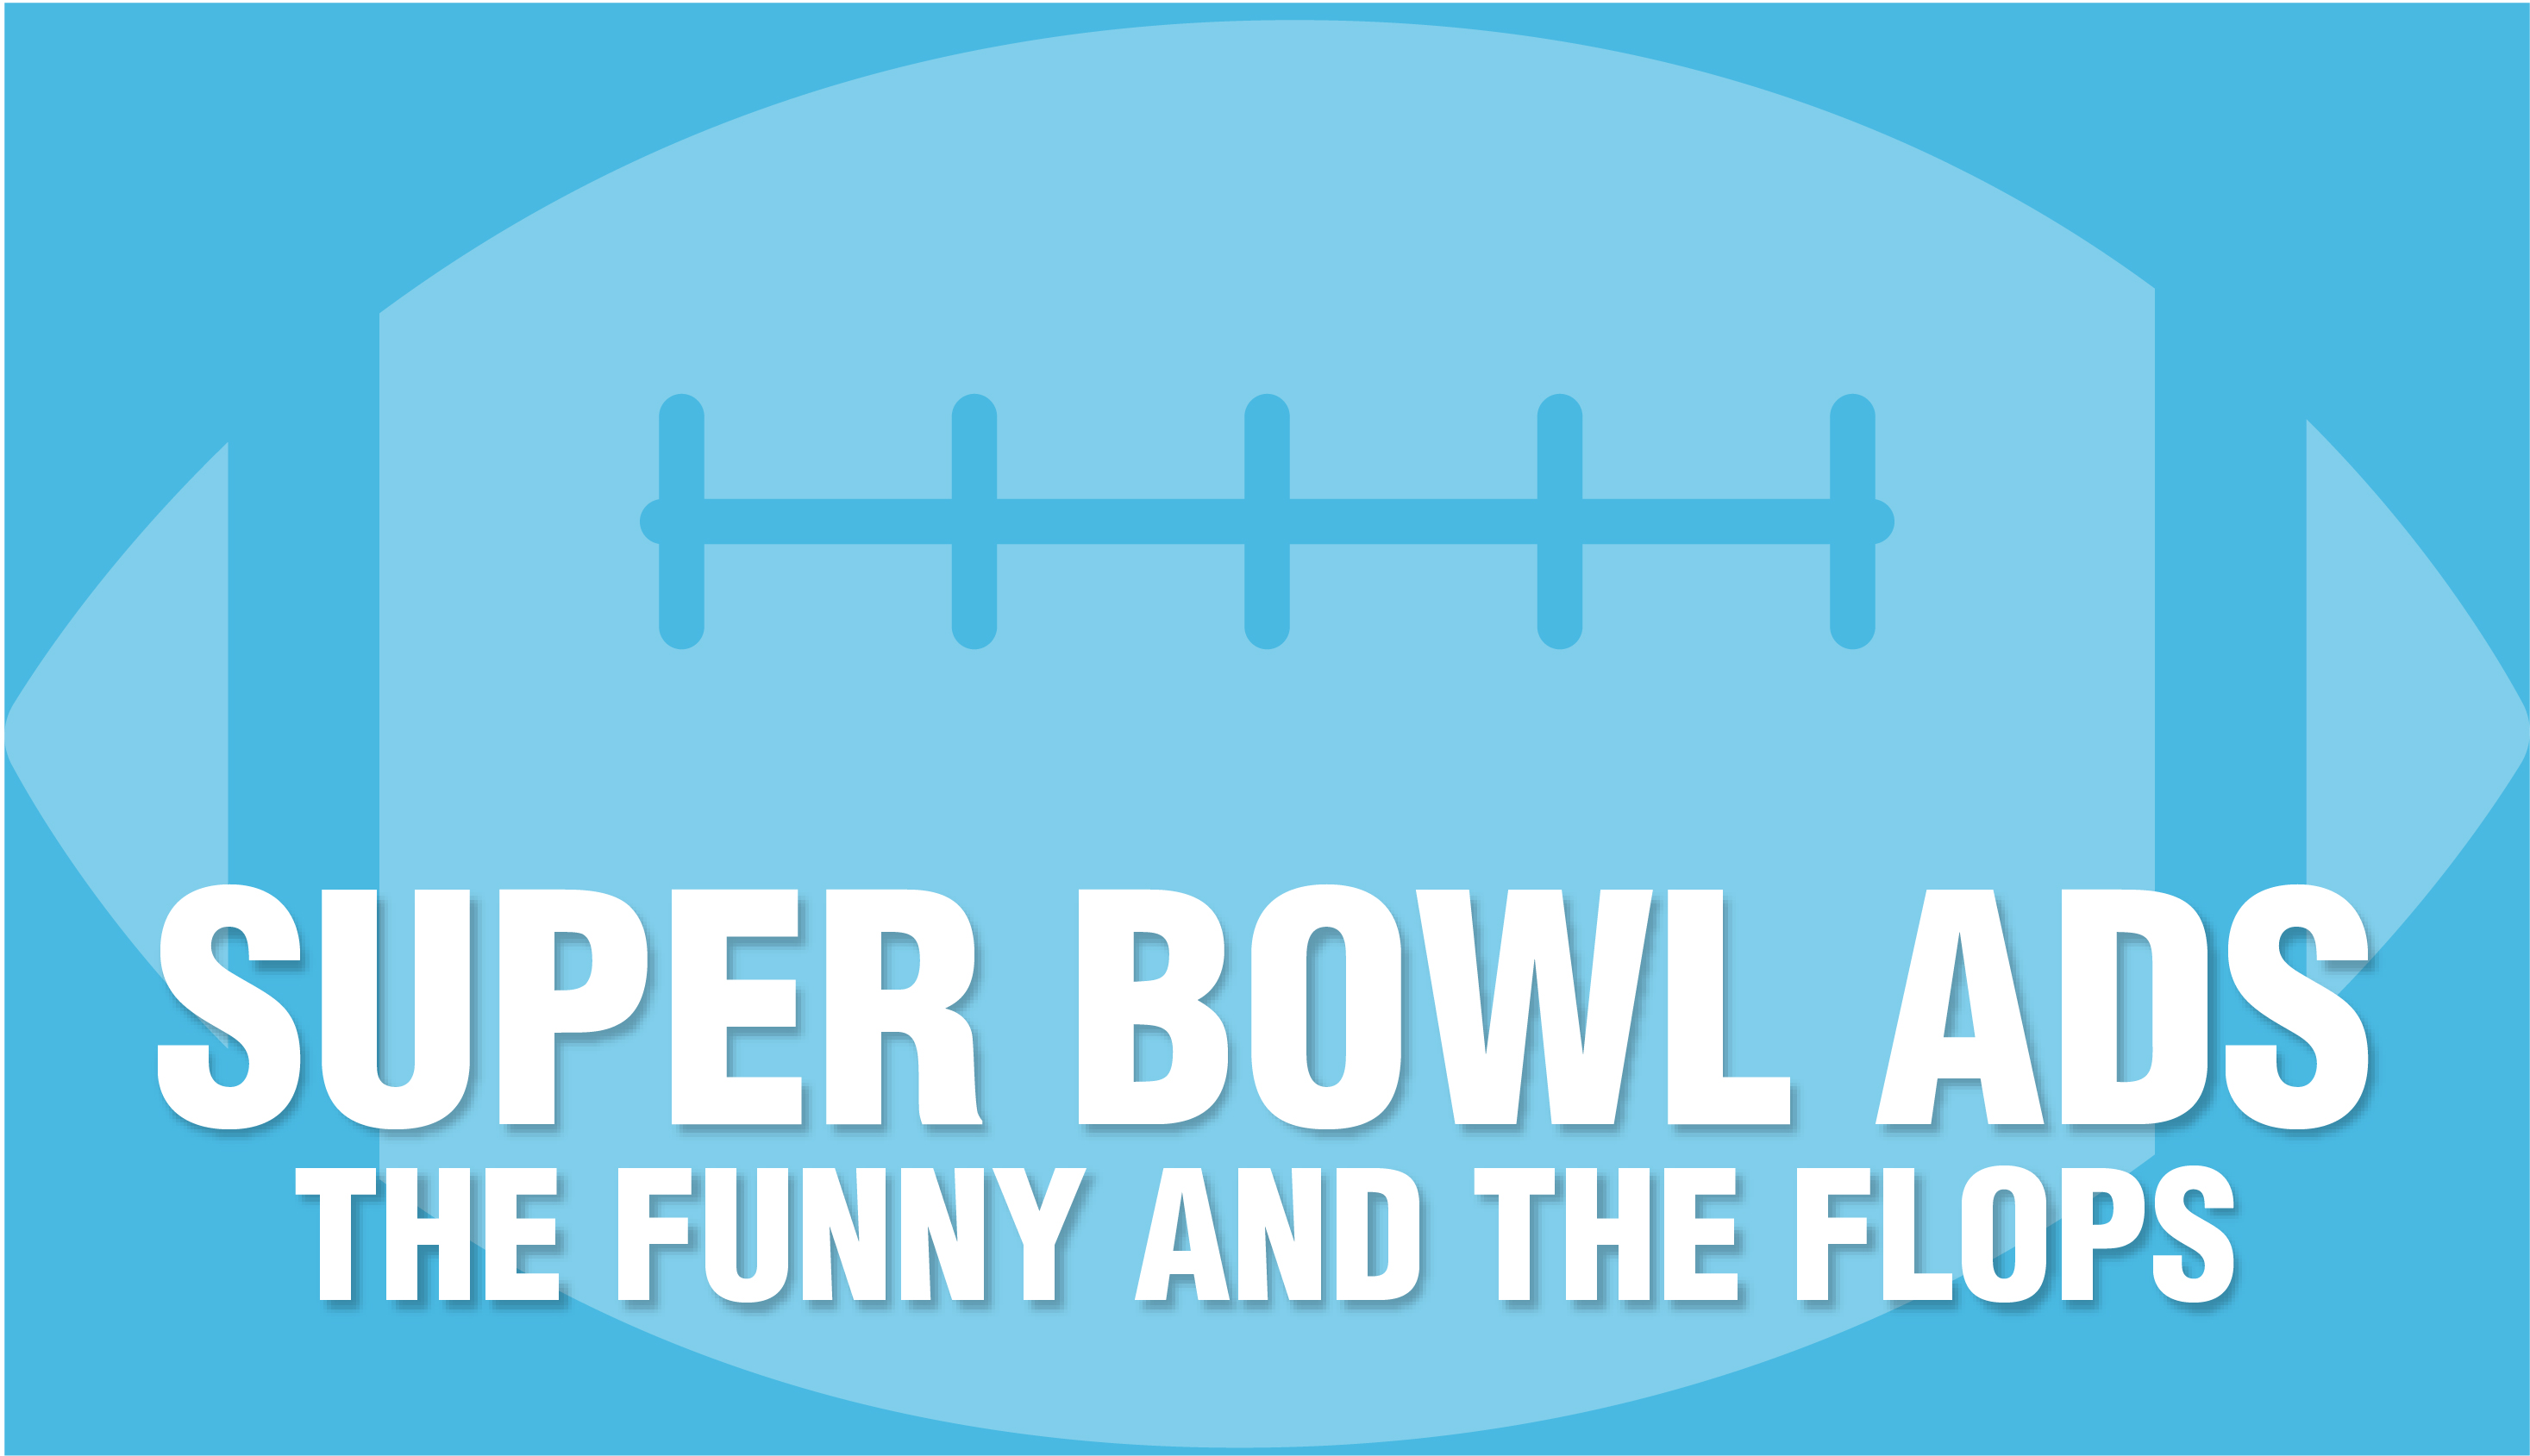 Super Bowl Ads: The Funny and the Flops